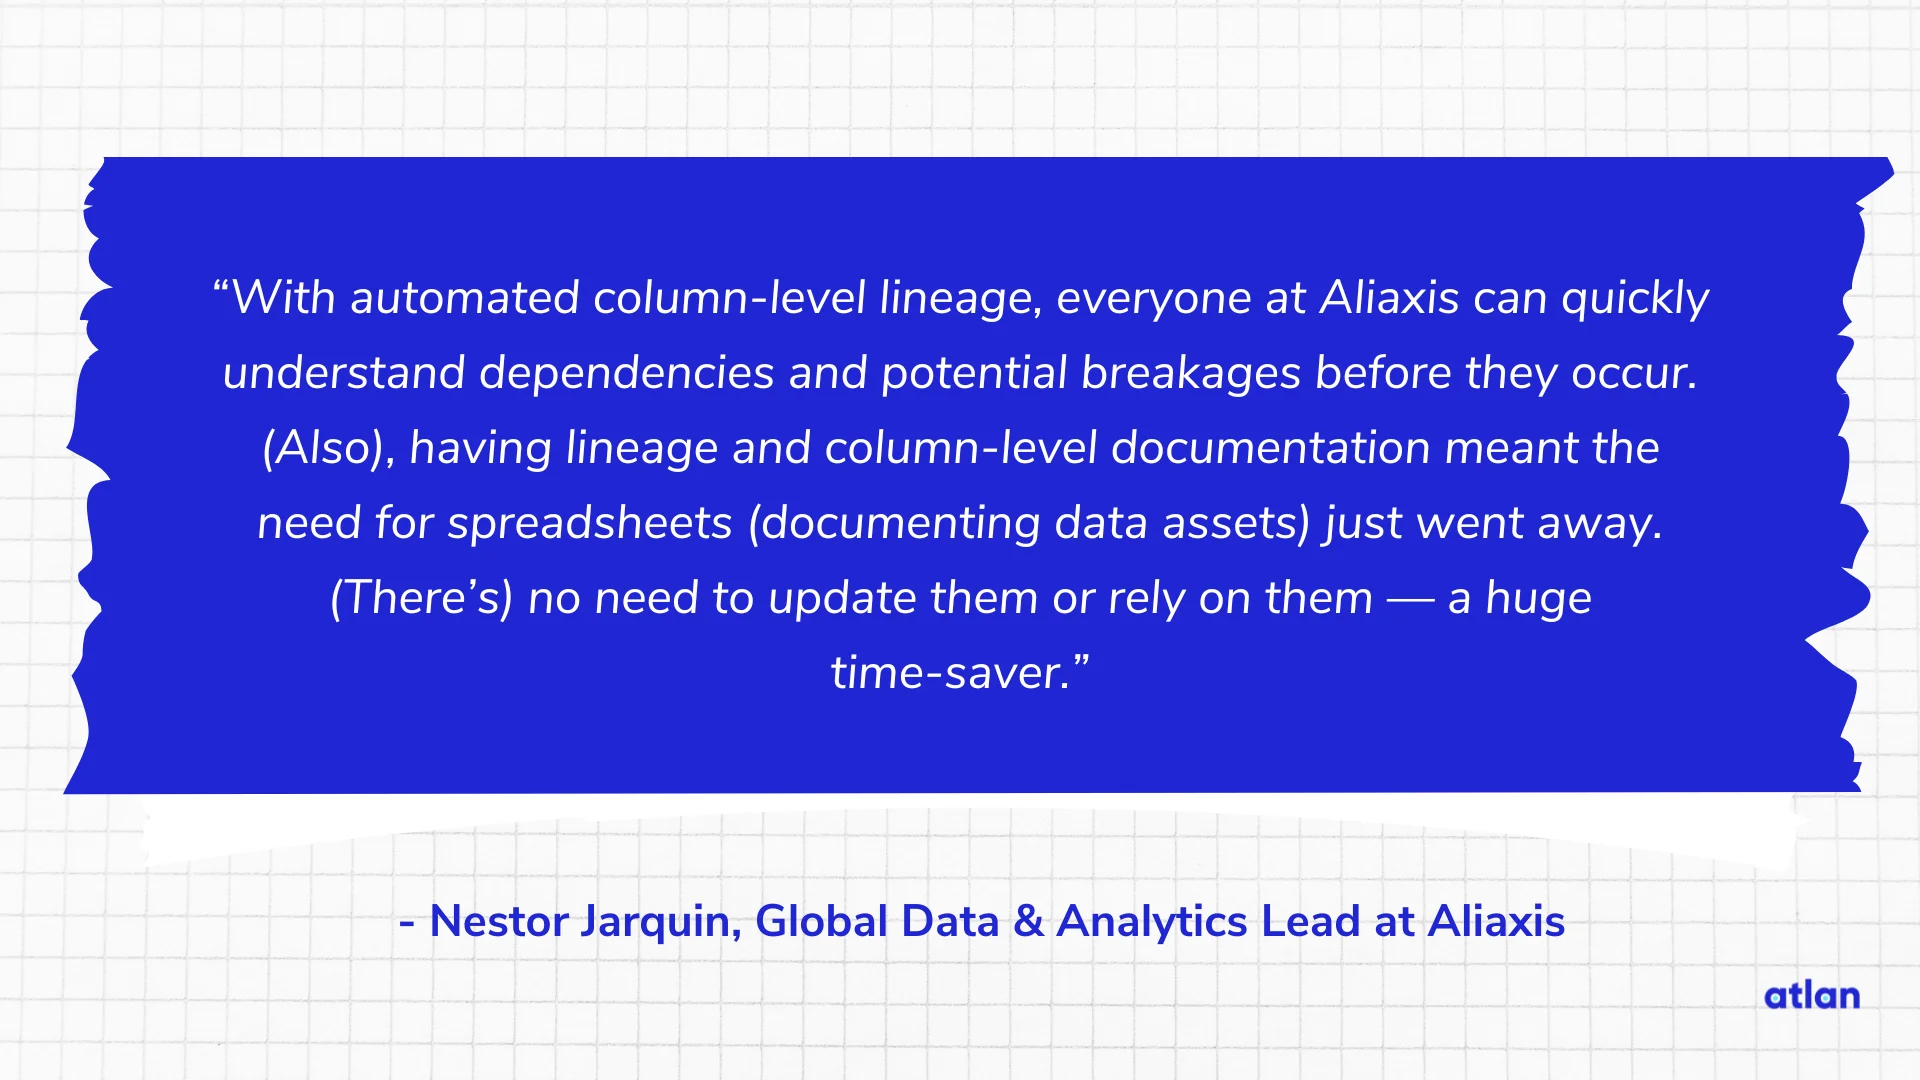 Aliaxis can quickly understand dependencies and potential breakages before they occur